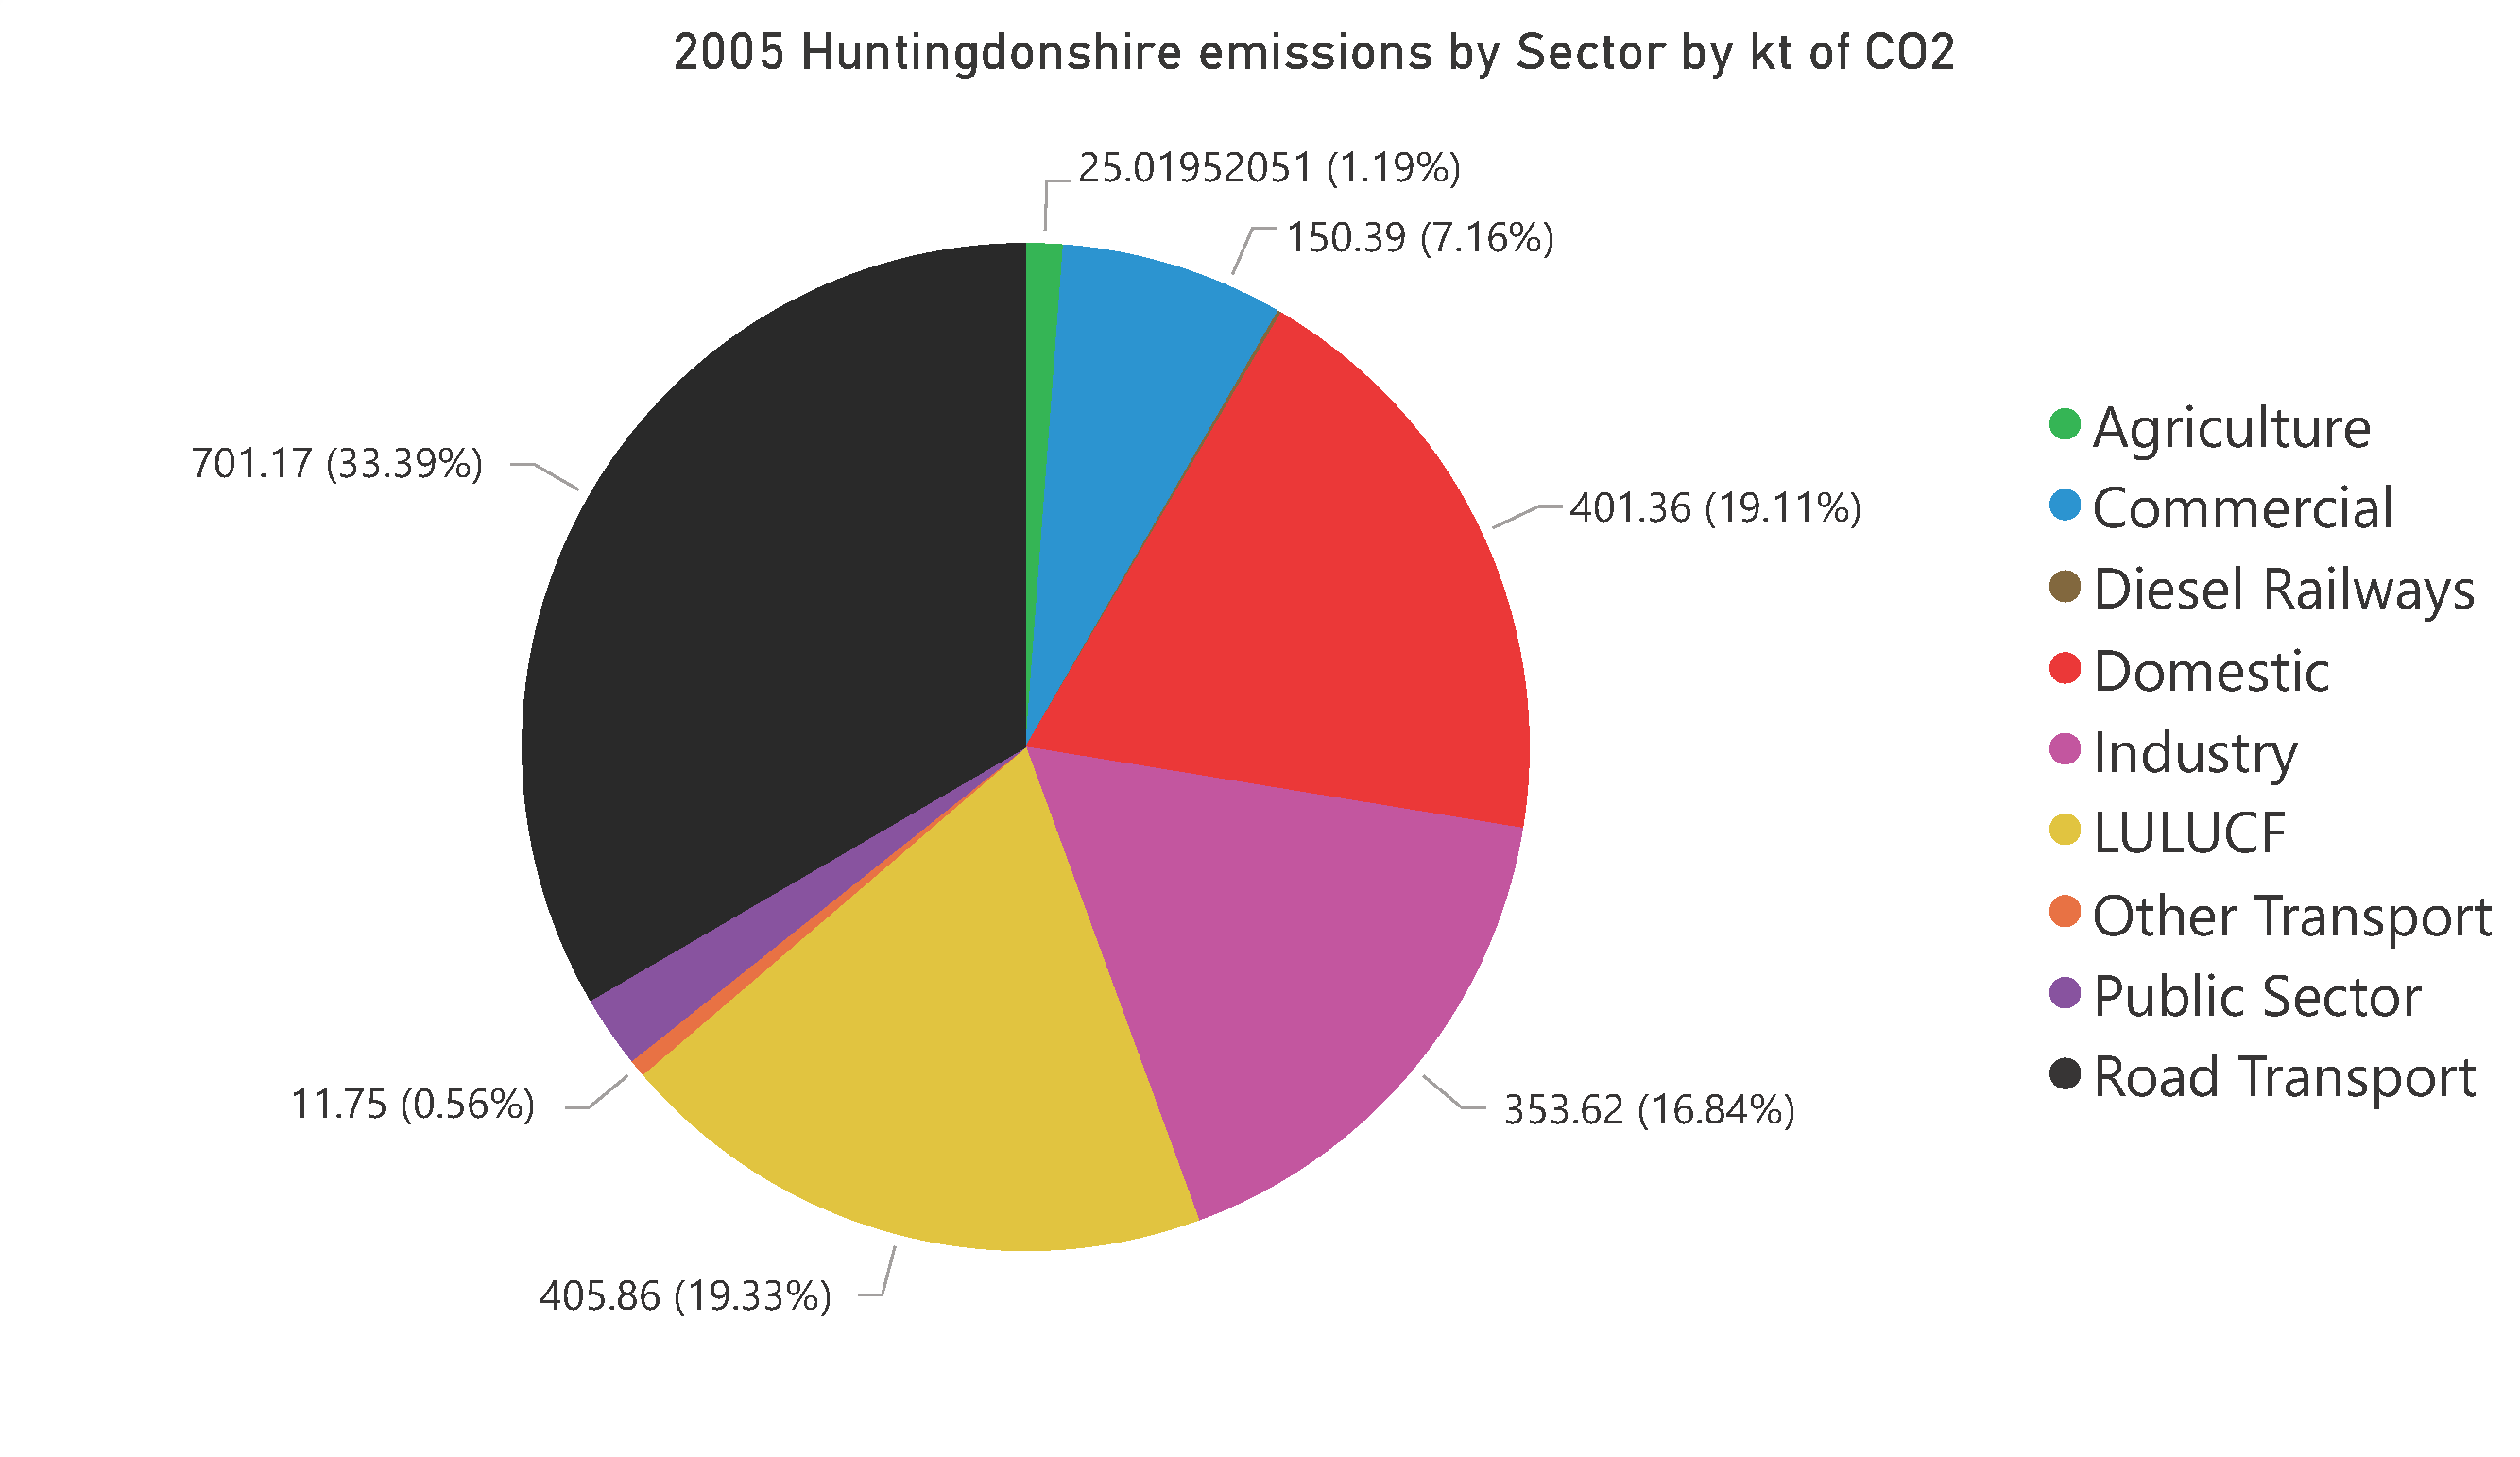 Pie Chart showing 2005 Huntingdonshire emissions by sector by kilotons of co2.  Agriculture 25.02 kilotons 1.19% Commercial 150.39 kilotons 7.16% Diesel Railways 2.37 kilotons 0.11% Domestic 401.36 kilotons 19.11% Industry 353.62 kilotons 16.84% LULUCF 405.86 kilotons 19.33% Other Transport 11.75 kilotons 0.56% Public Sector 48.59 kilotons 2.31% Road Transport 701.17 kilotons 33.39%